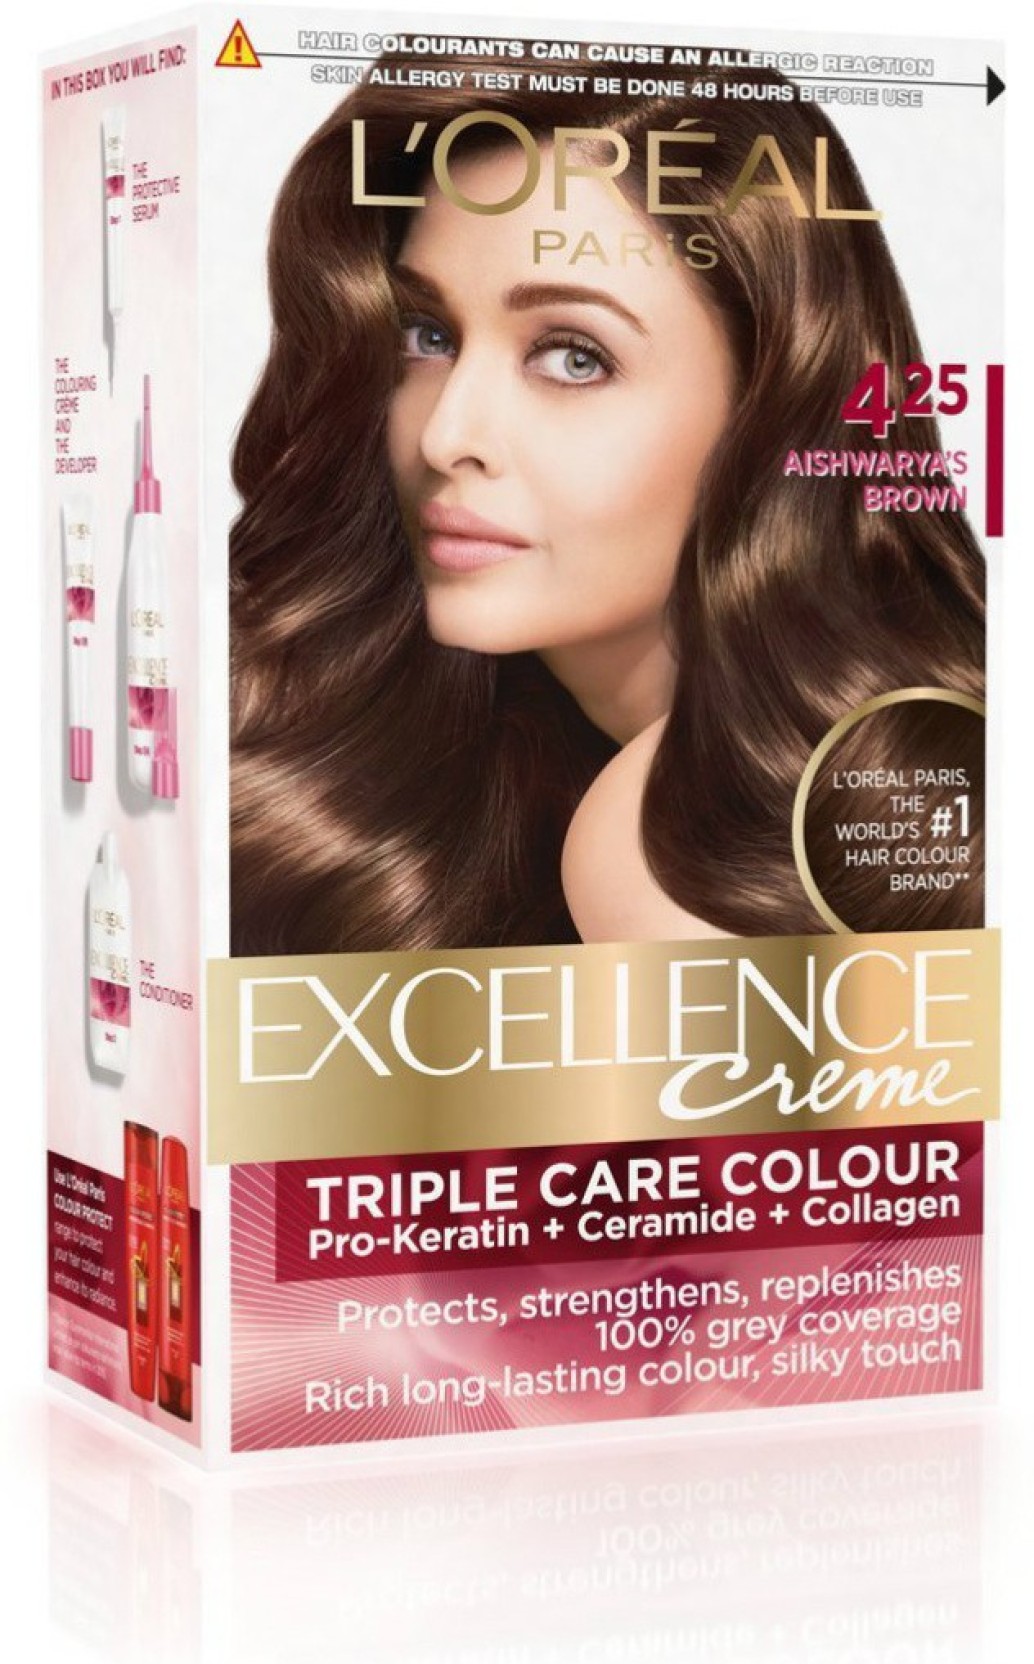 L'Oreal Paris Excellence Creme Hair Color - Price in India, Buy L'Oreal